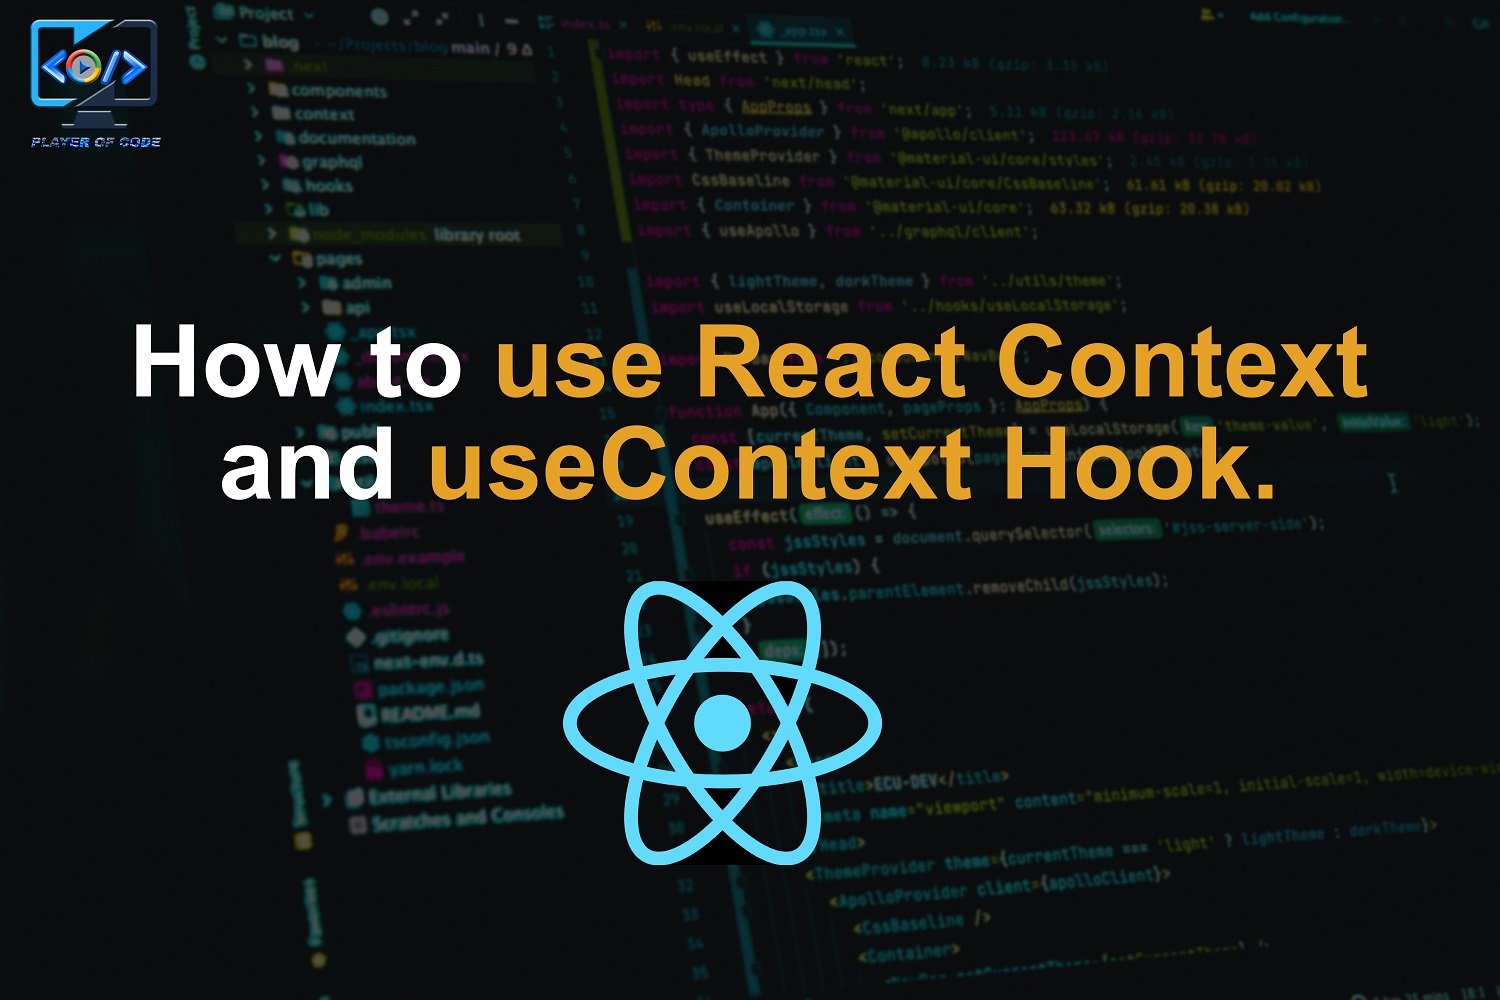 How to use react context and useContext hook